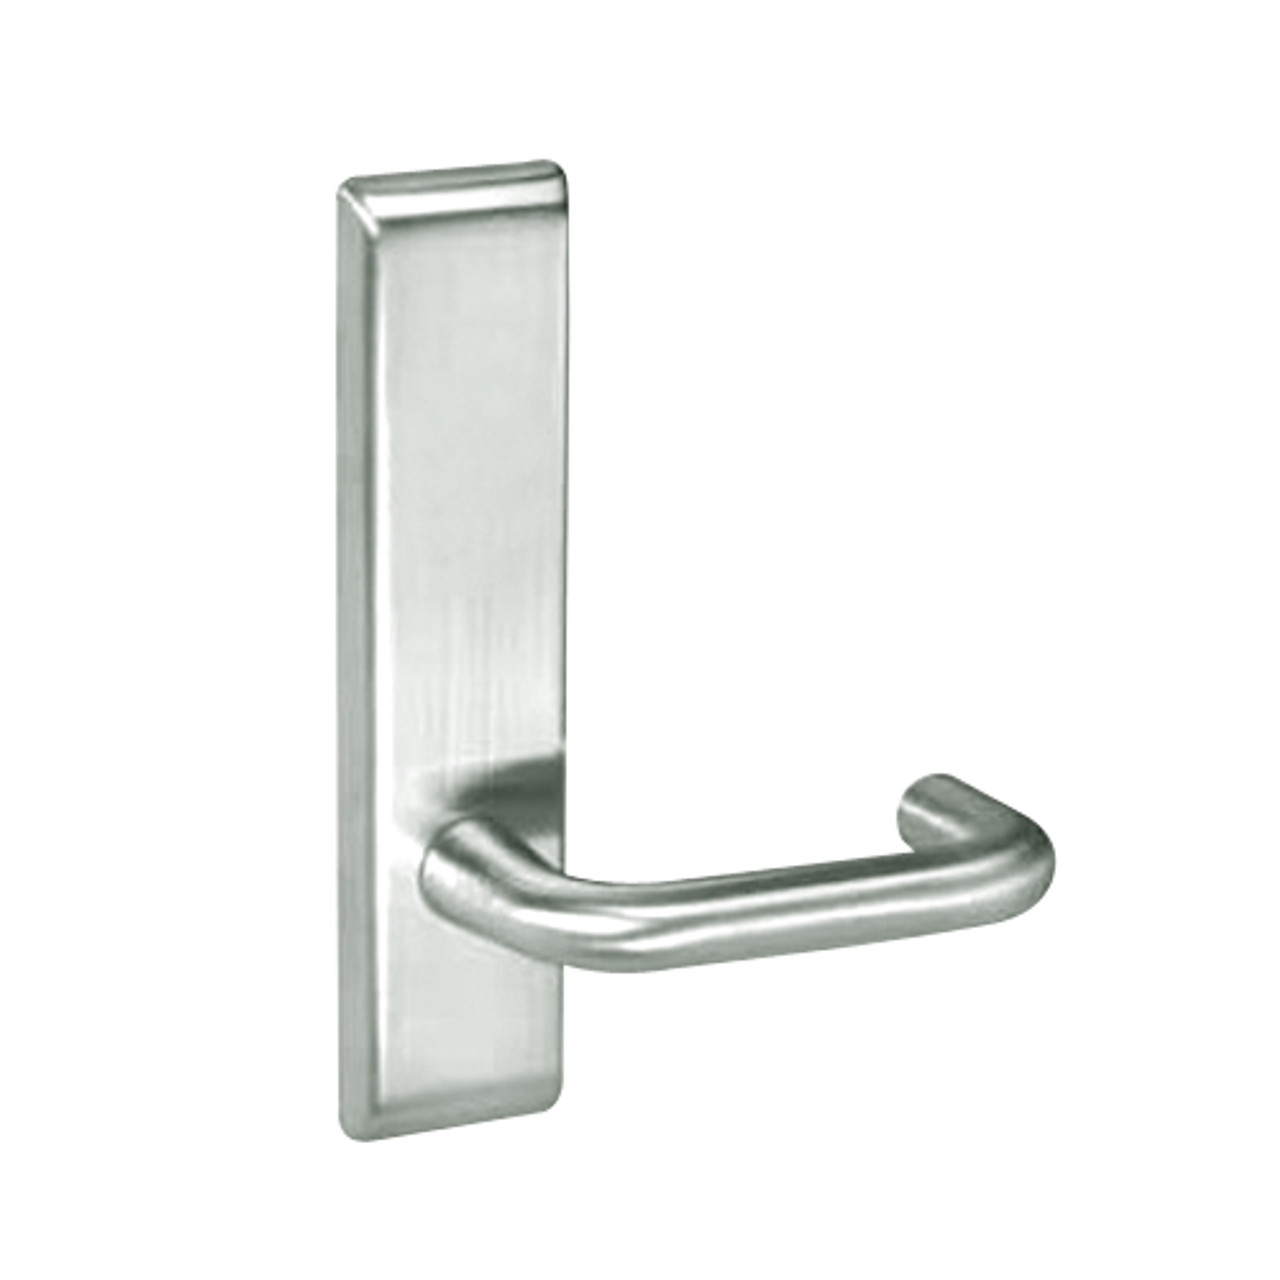 CRCN8802FL-618 Yale 8800FL Series Non-Keyed Mortise Privacy Locks with Carmel Lever in Bright Nickel